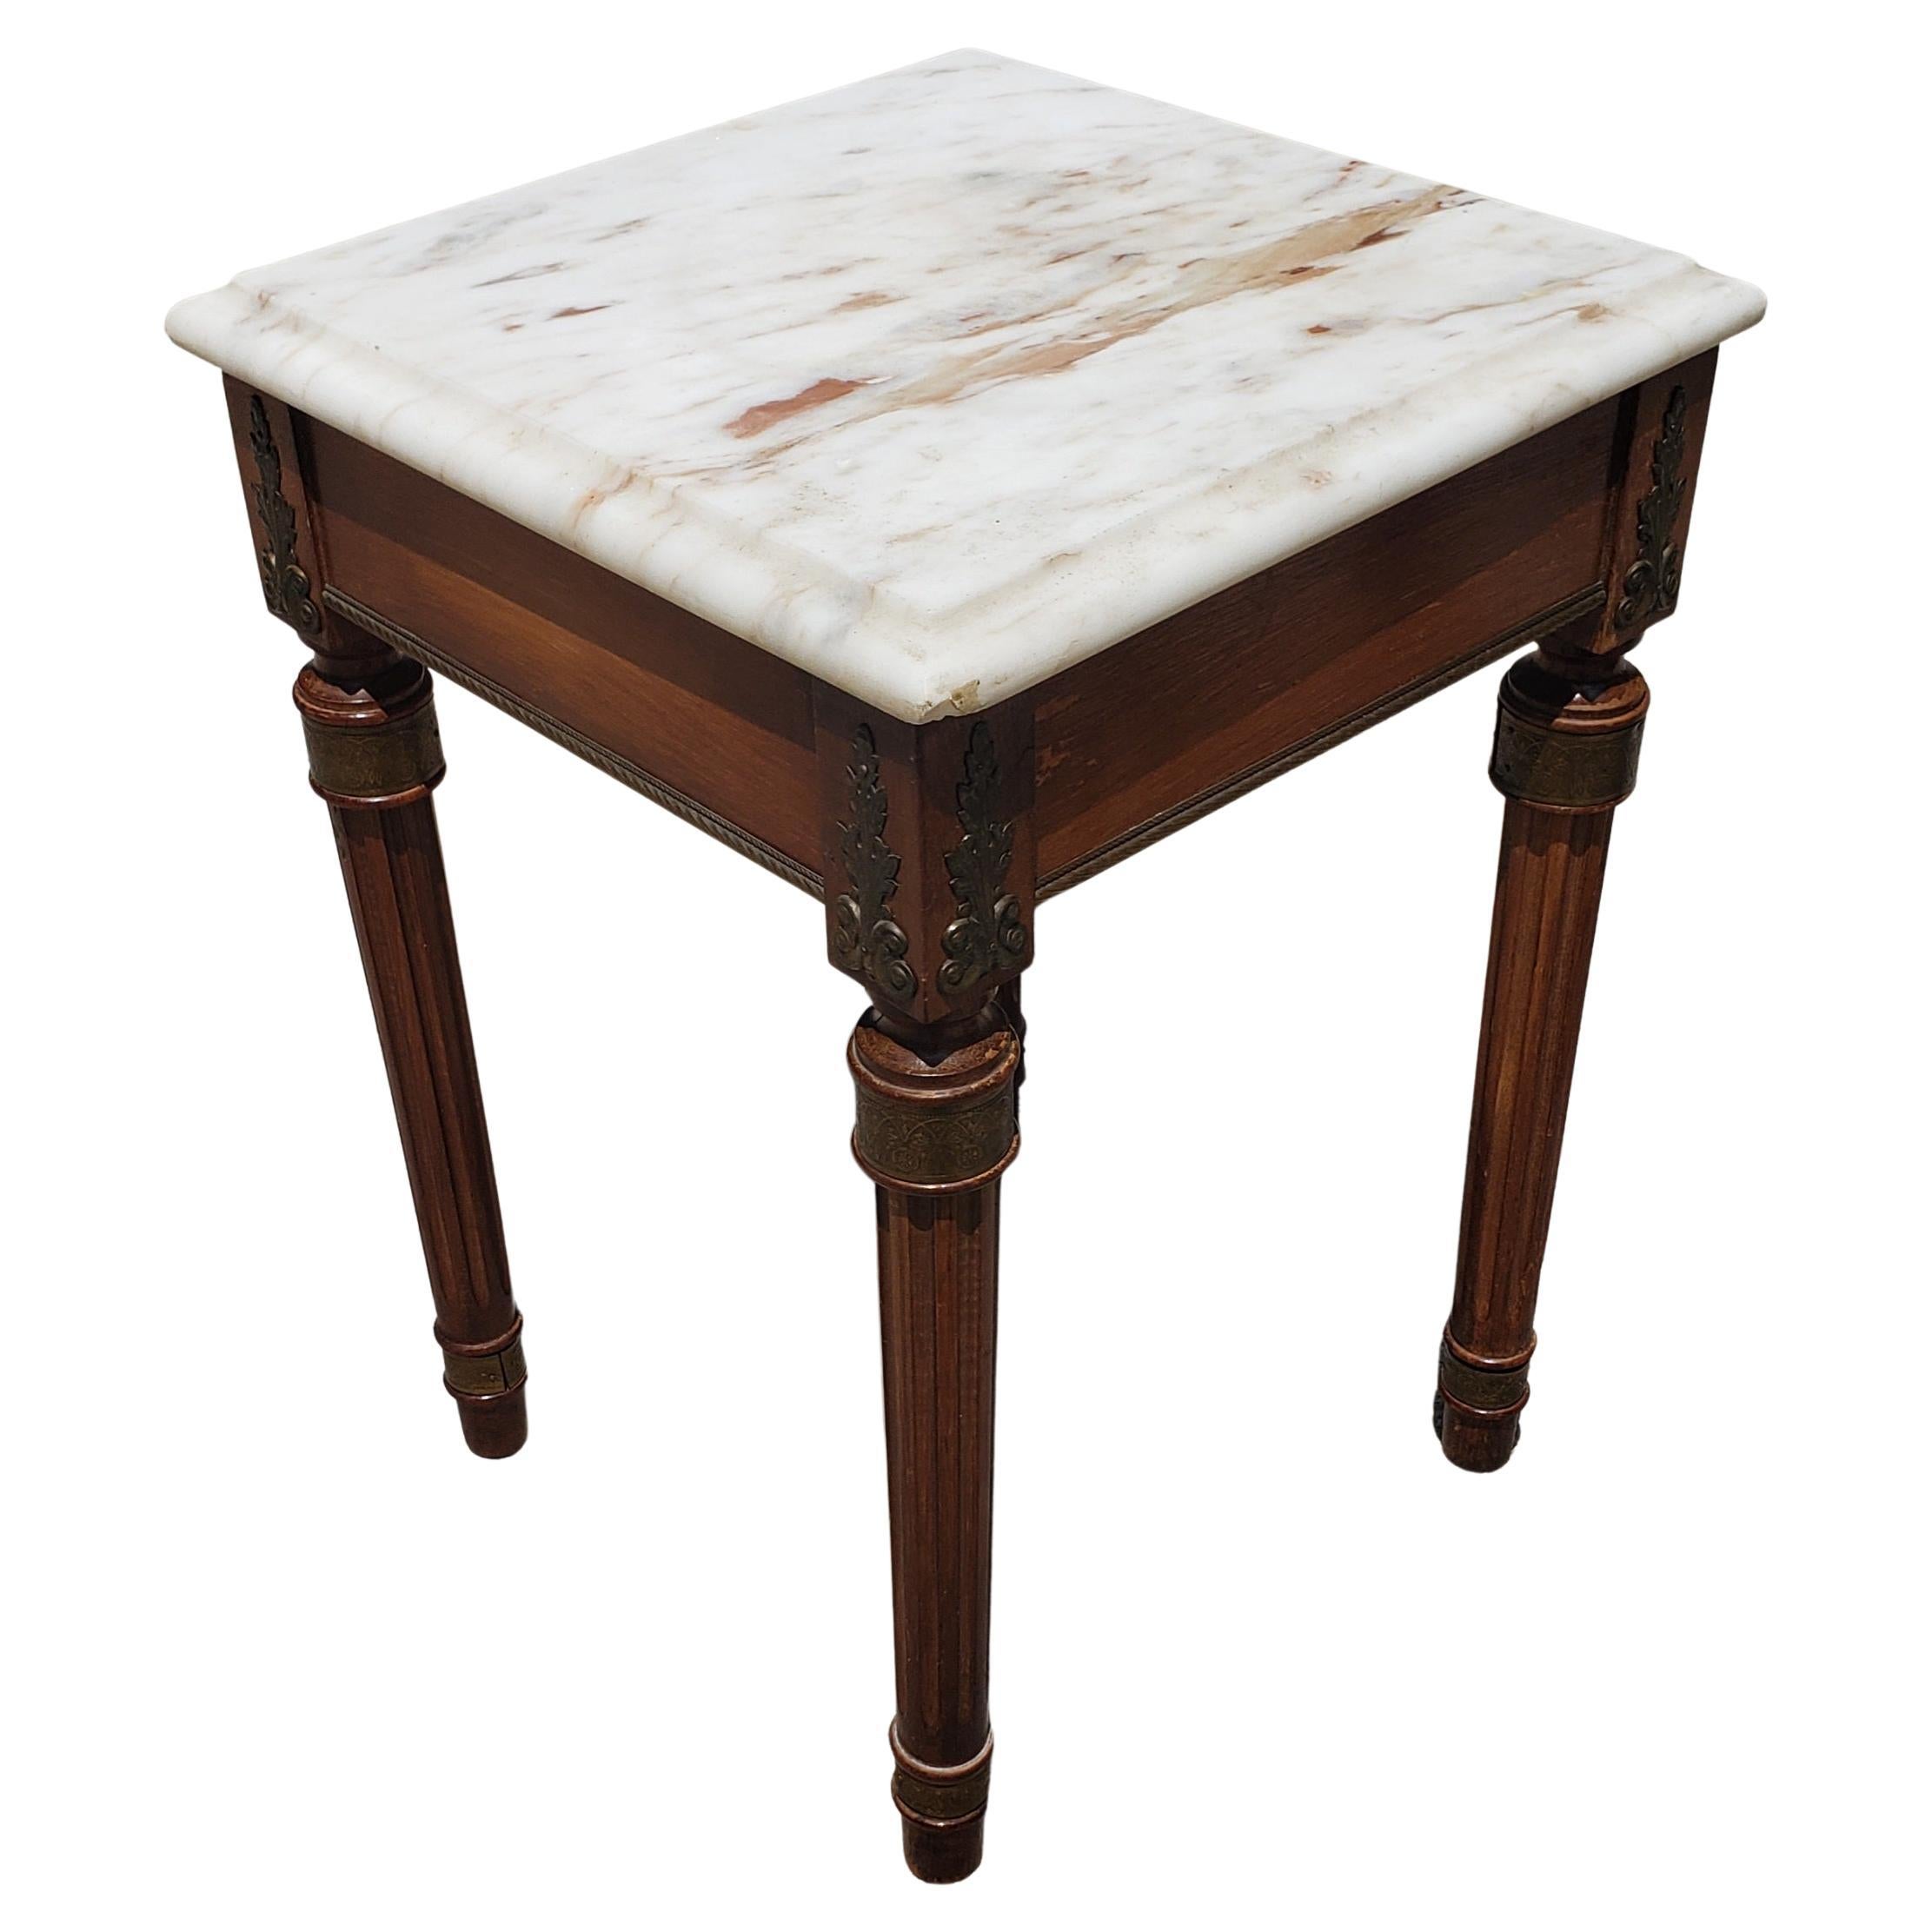 20th Century Louis XVI Style Marble Top and Brass Mounted Wood Square Side Tables, a Pair